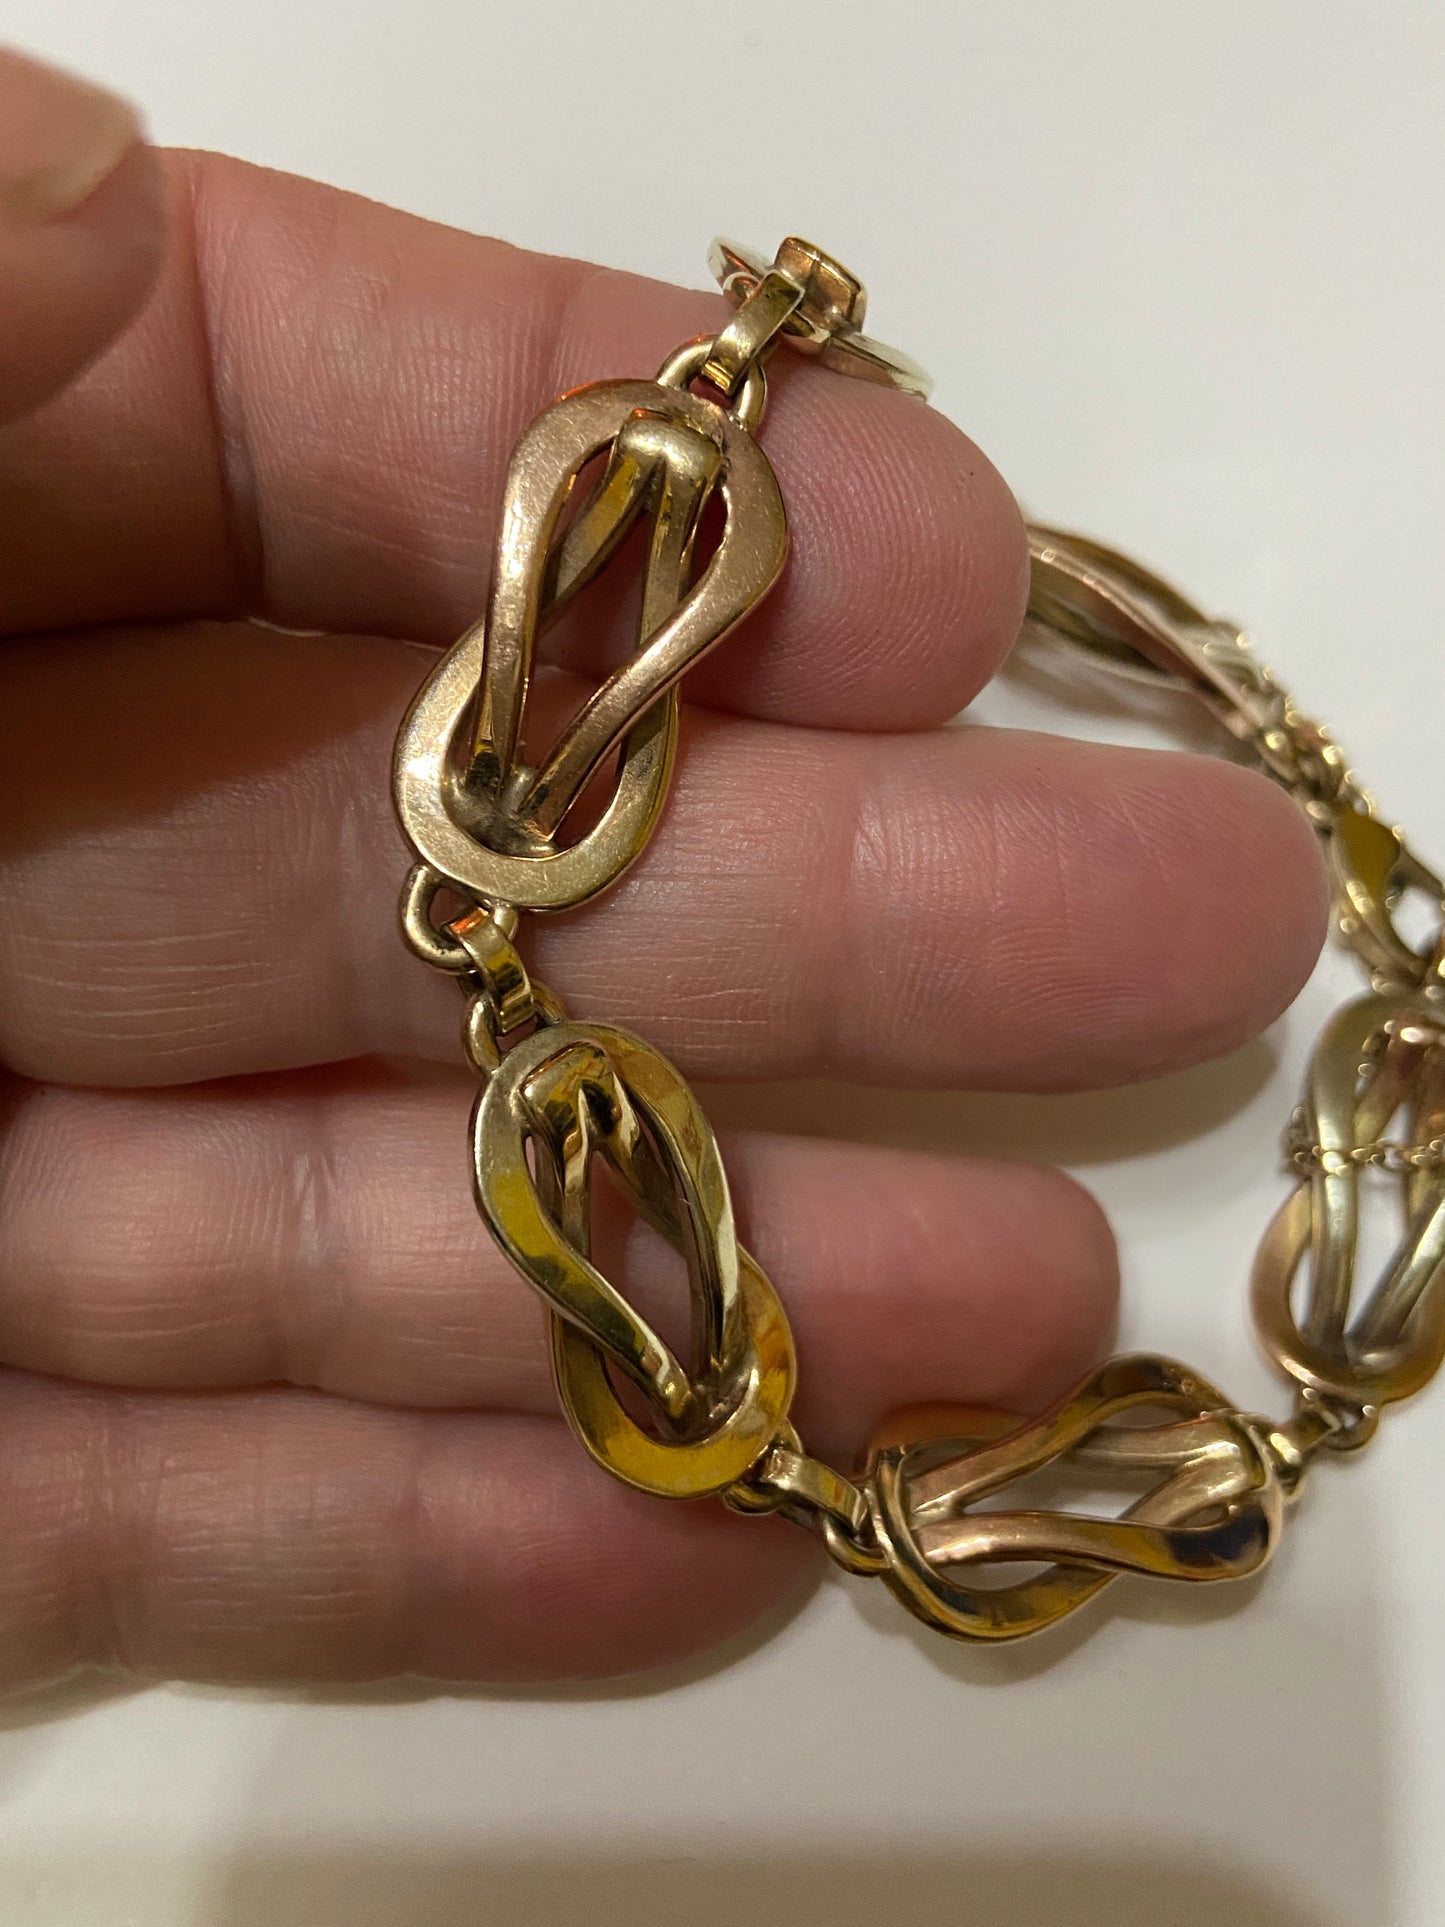 9ct vintage ornate and heavy bracelet, three colour gold